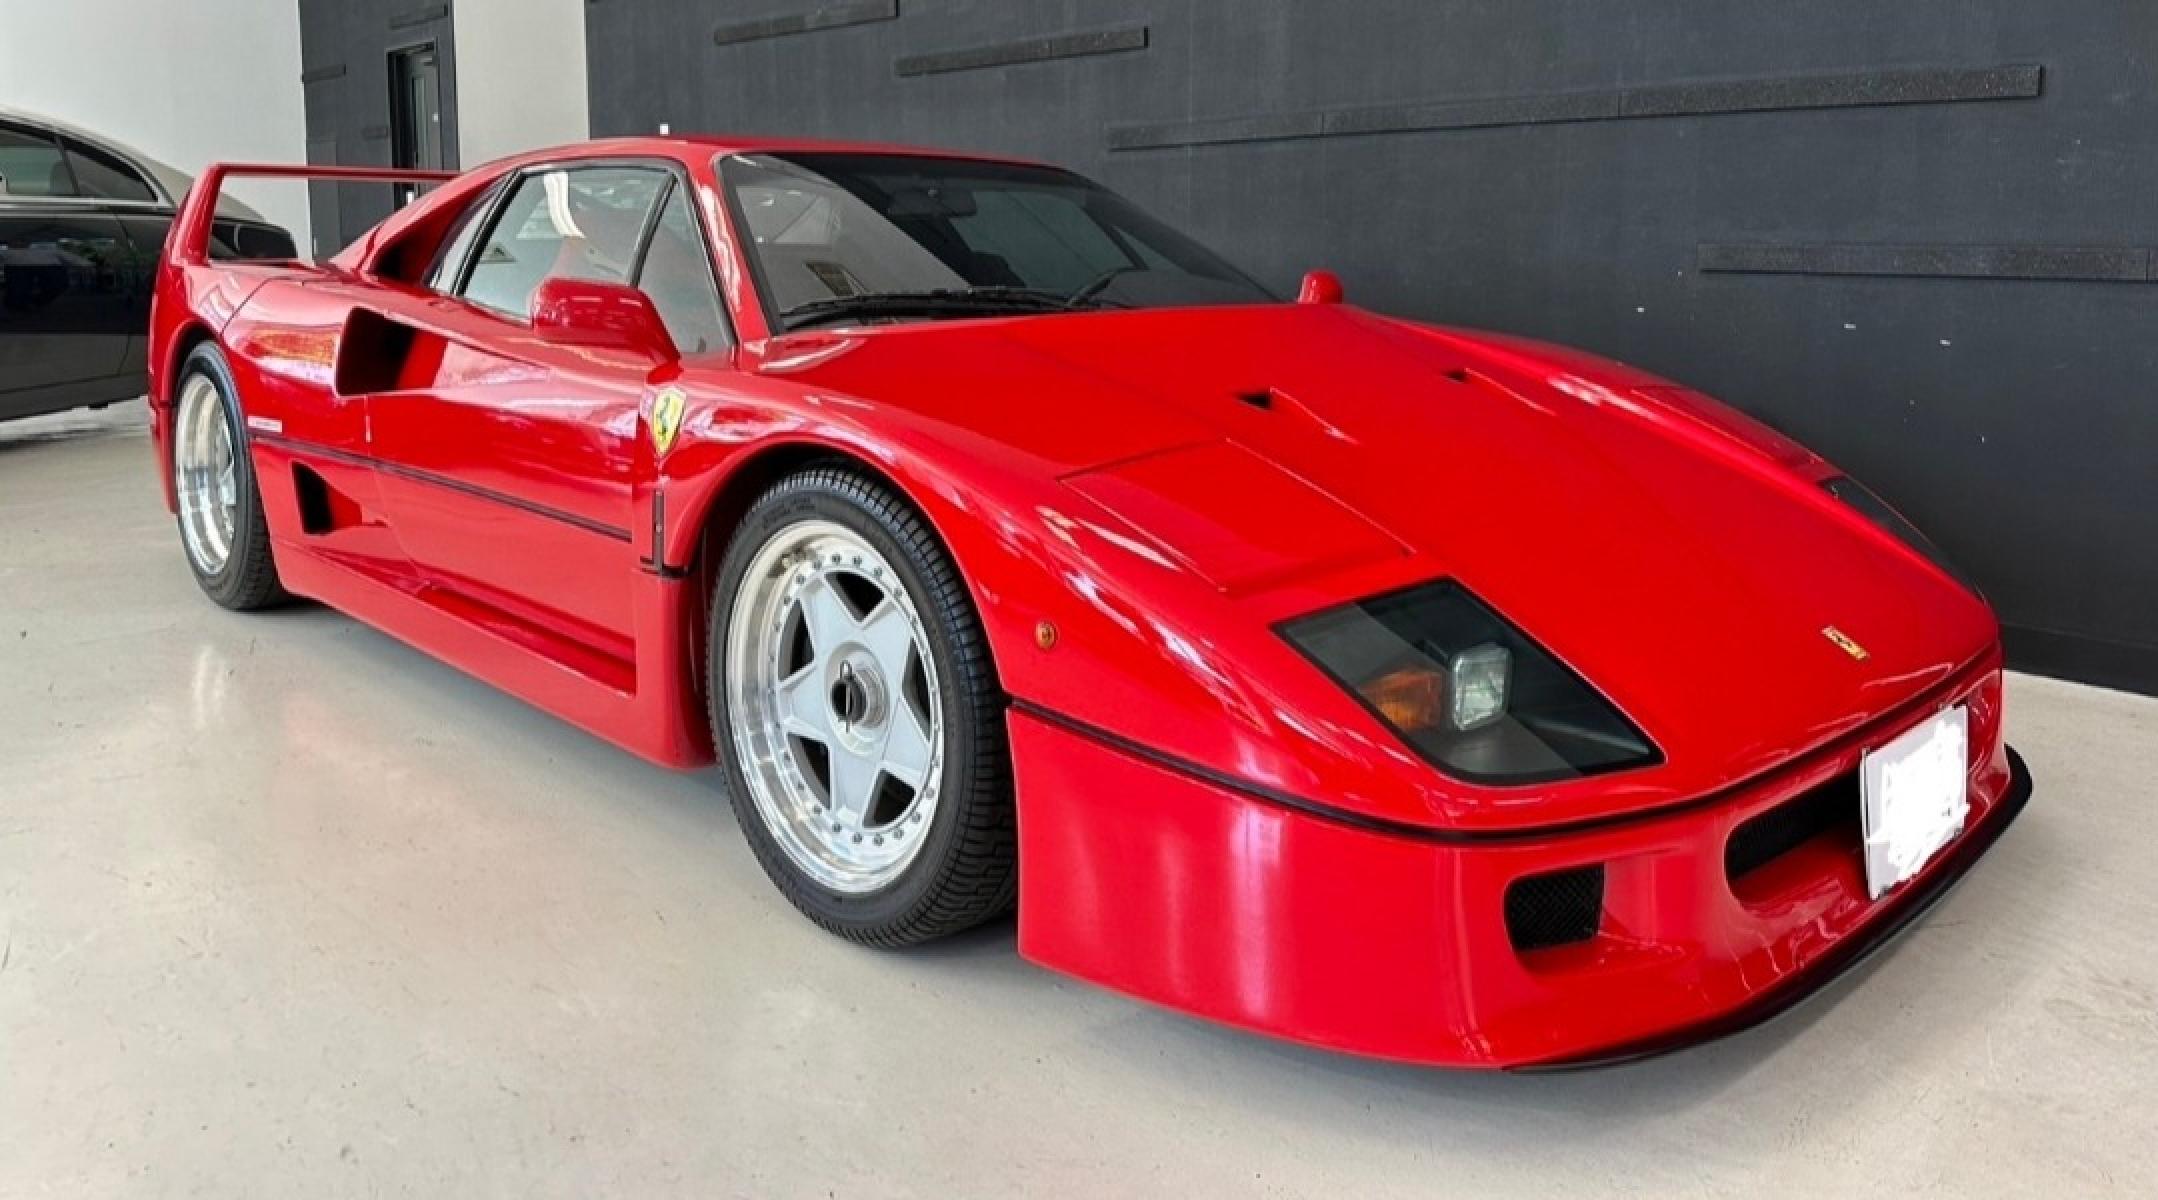 1990 Red Ferrari F40 , 0.000000, 0.000000 - 1990 Ferrari F40 1990 delivered as new in France 1992 delivered to 2nd owner in Japan from France. 2003 current owner All service record from present owner All repaint for refresh perfect skill Exchanged new cutch and master last month, was reupholstered both of the seat new fabric and spong - Photo #0